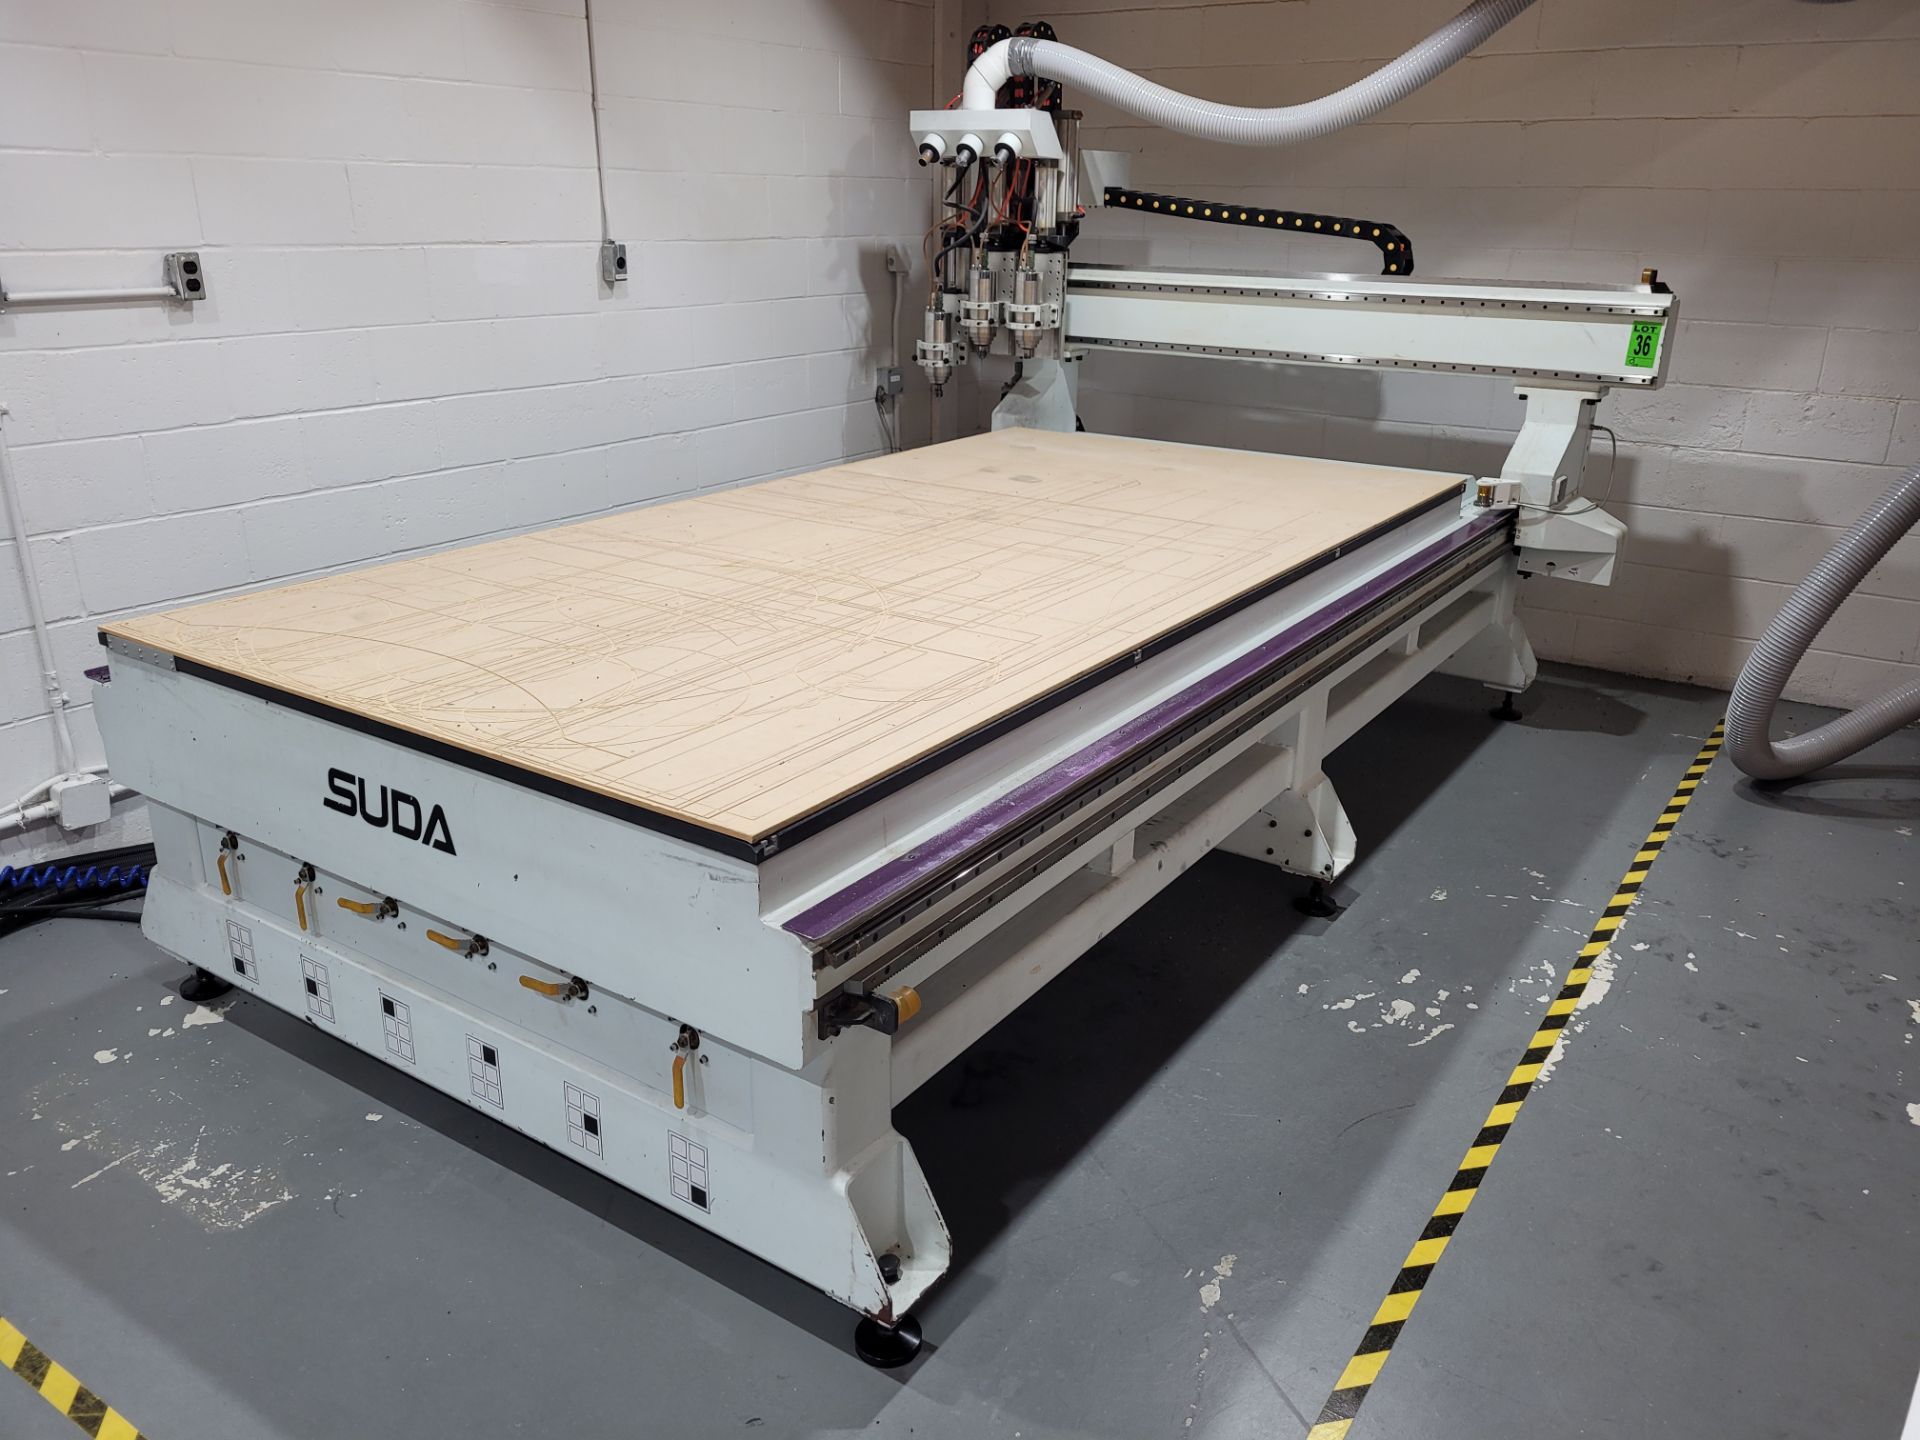 2015 SUDA ATC CNC Router mod. MG1630C, 3-Head System with Accessories and CRAFTEX mod. FM-300 Collec - Image 23 of 51